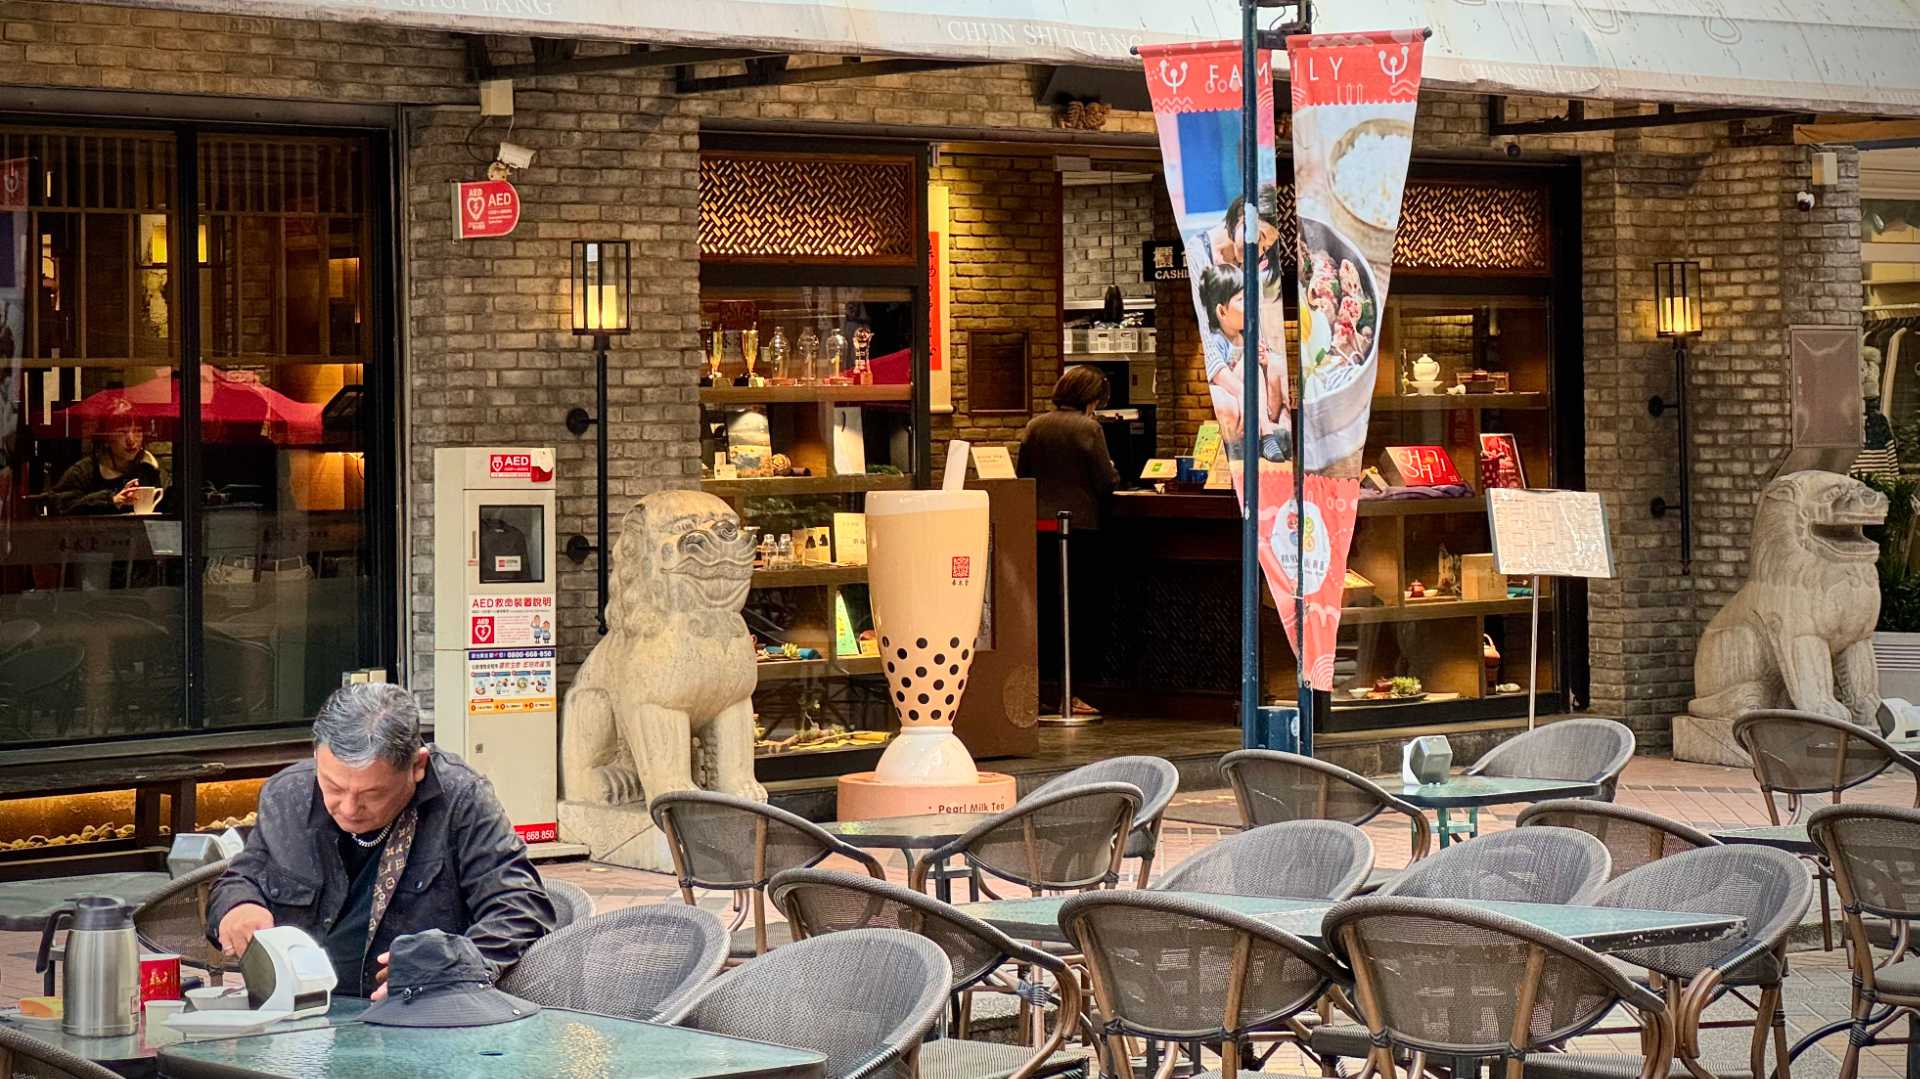 An elderly man sits alone drinking tea at one of many outdoor tables. Behind him is the entrance to a Chun Shui Tang teahouse, with stone lions either side of the door, plsu a 1.5 meter-tall sculpture of a glass of bubble tea next to one of the lions.